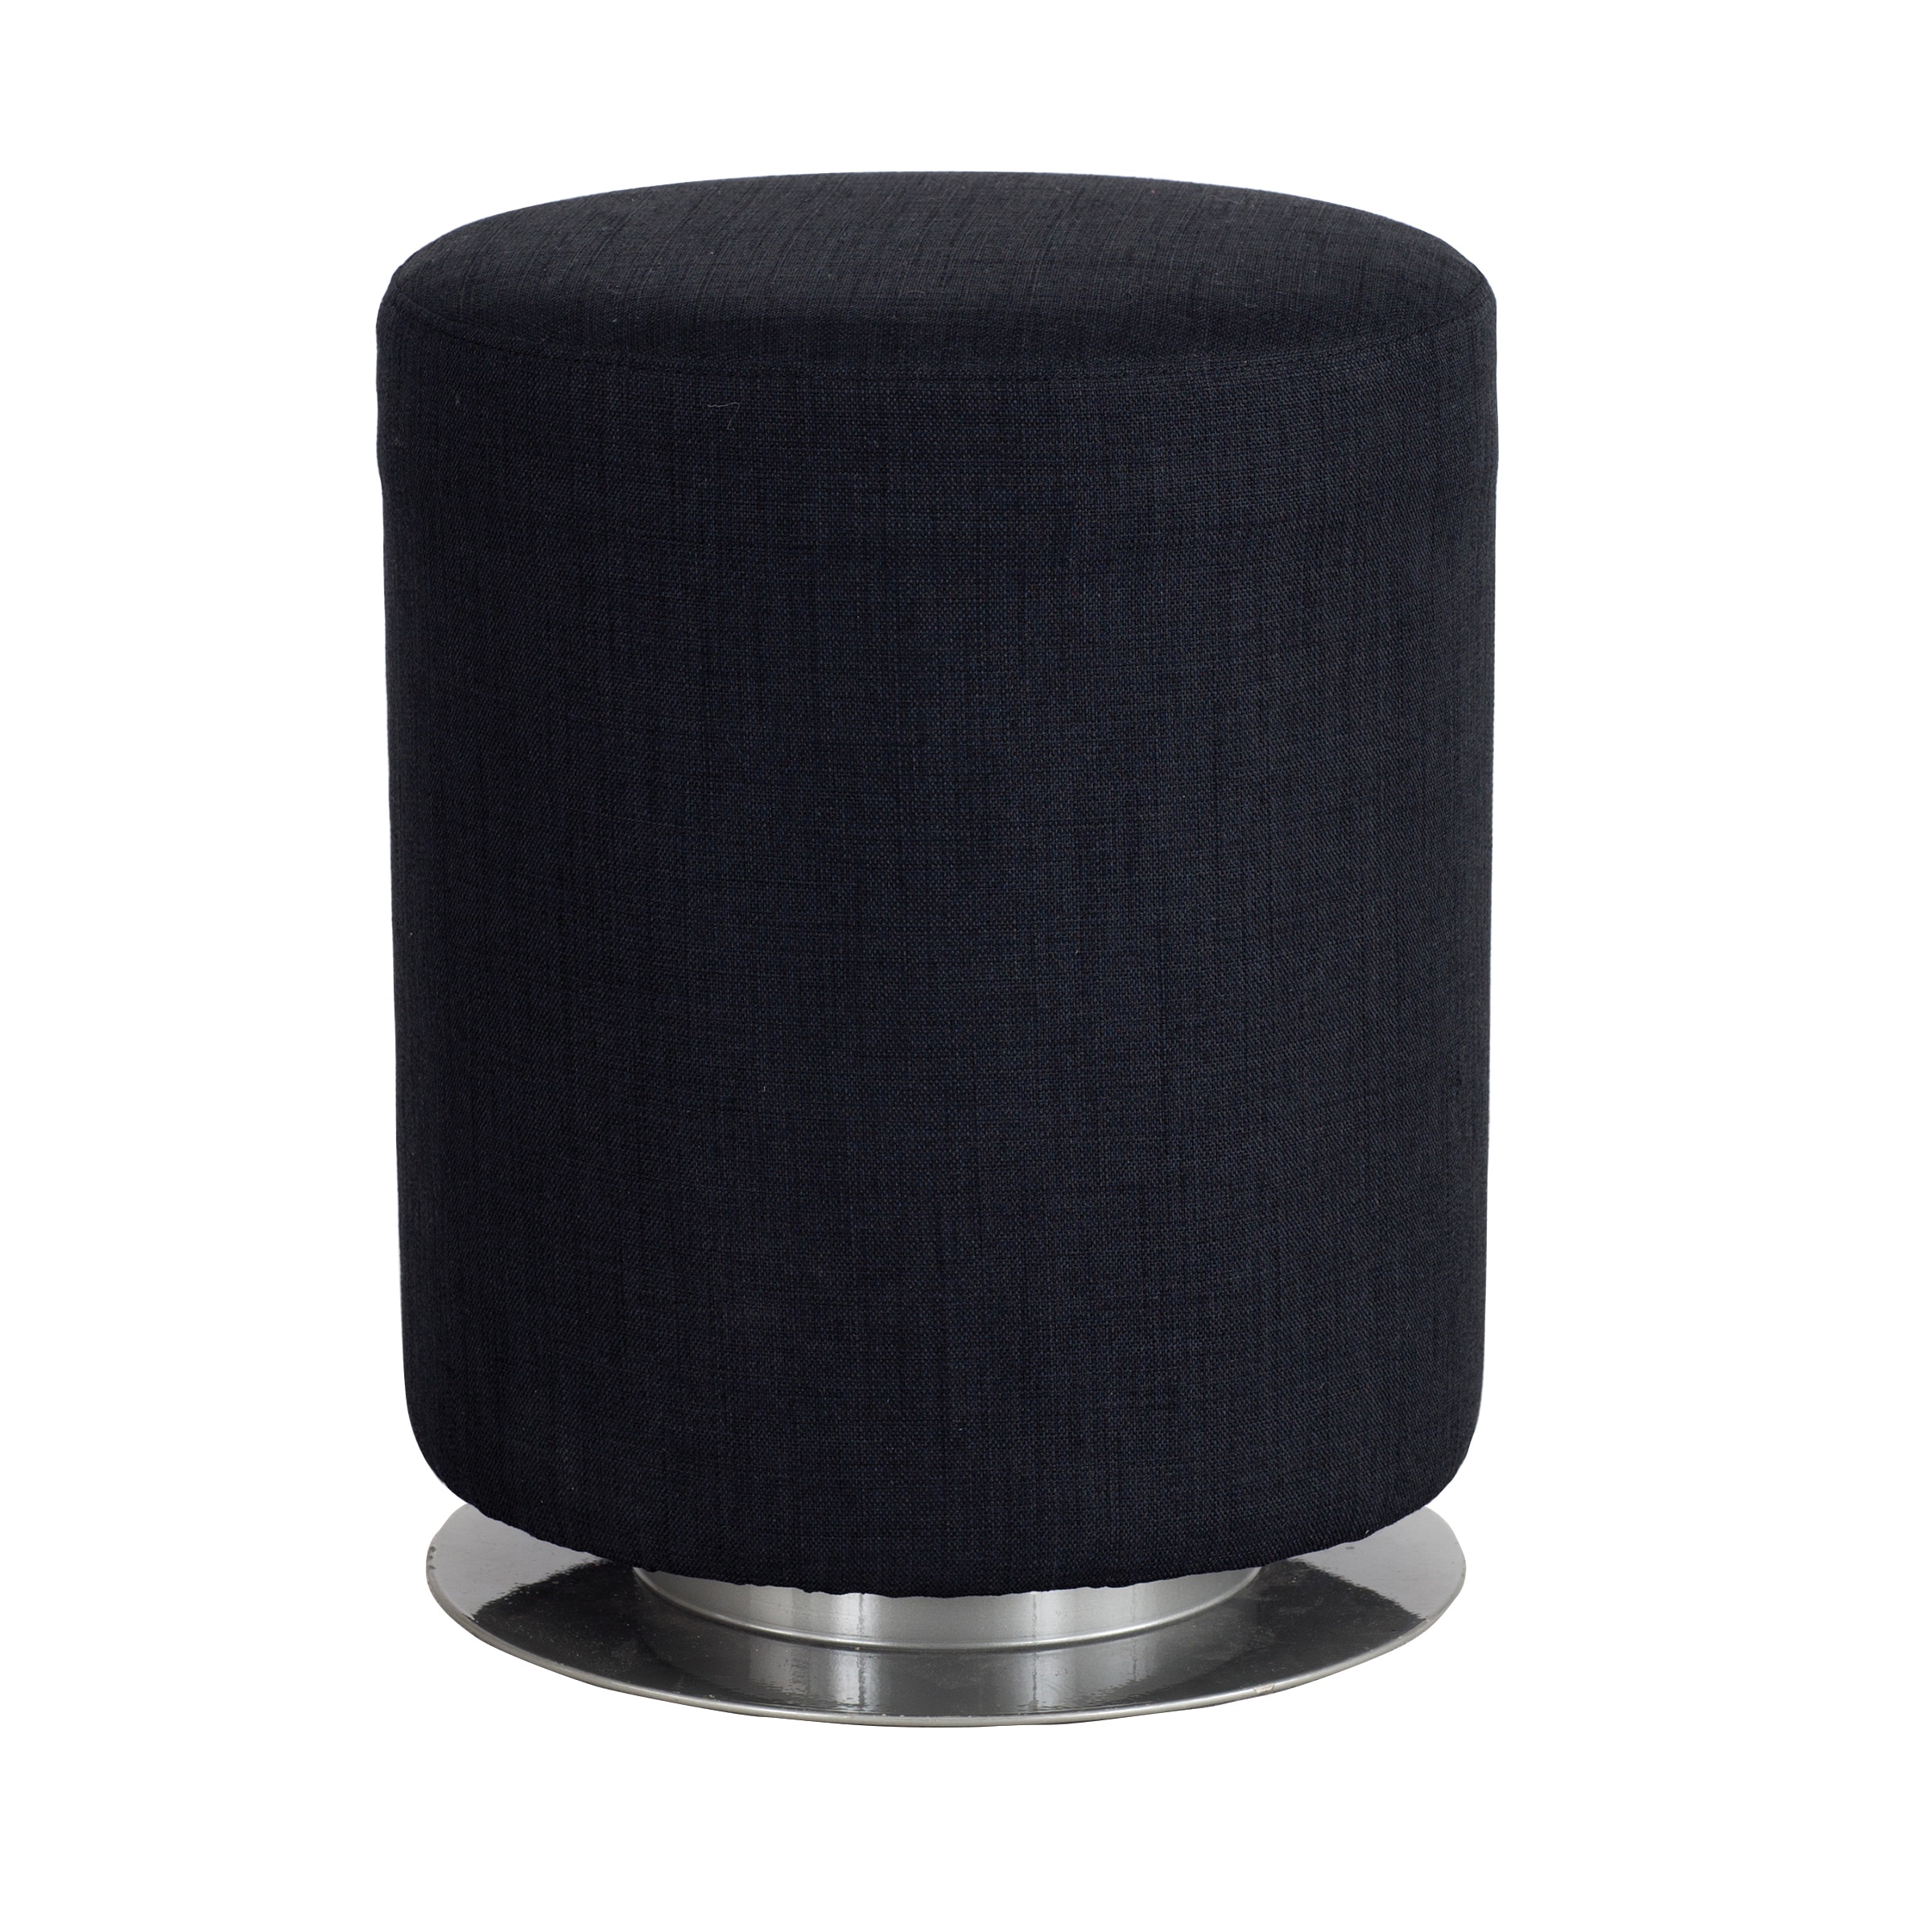 Safco Fabric Swivel Keg with Silver Powder Coated Steel Base - Black